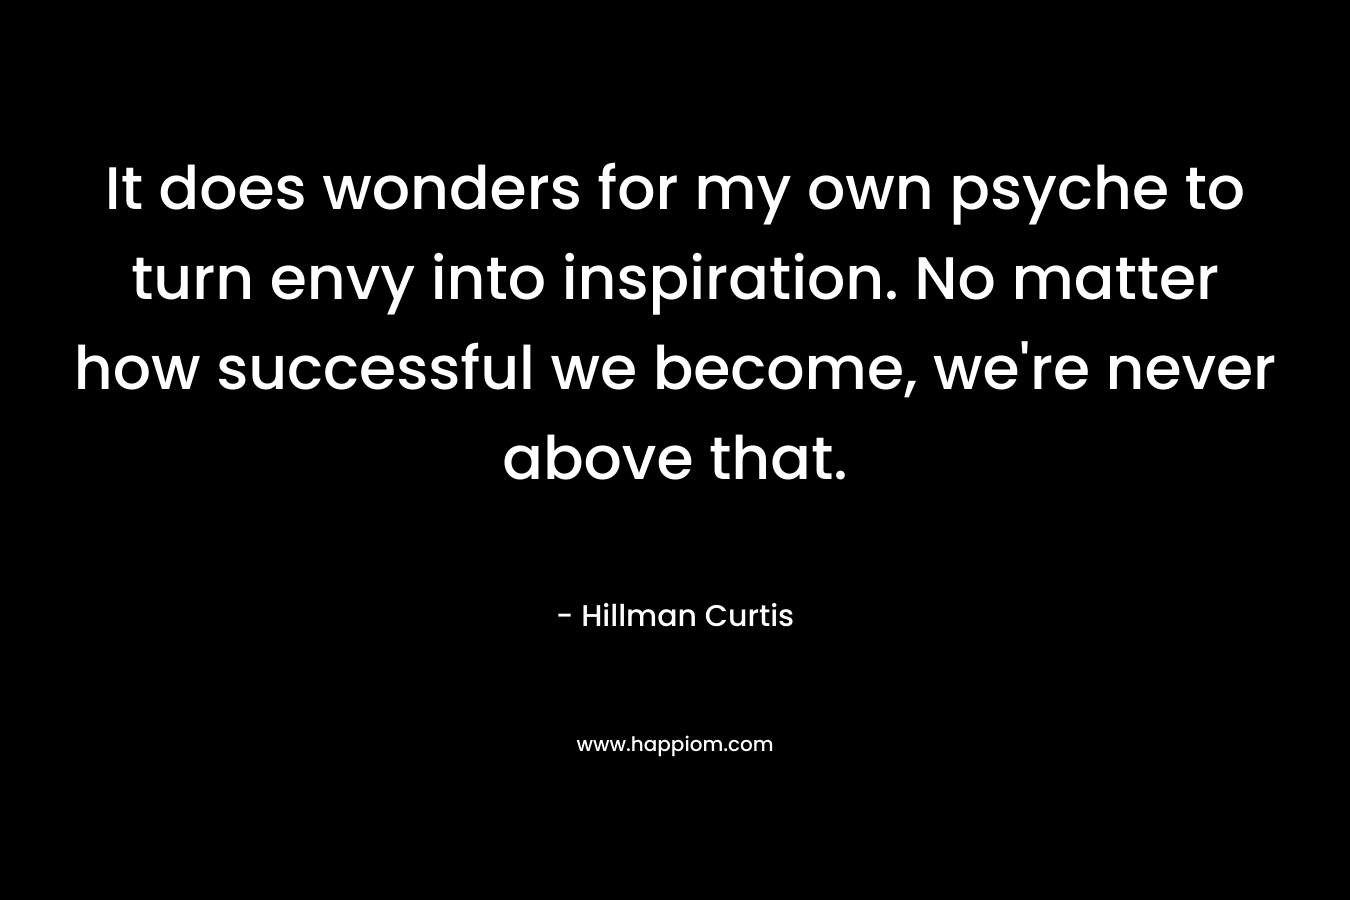 It does wonders for my own psyche to turn envy into inspiration. No matter how successful we become, we’re never above that. – Hillman Curtis